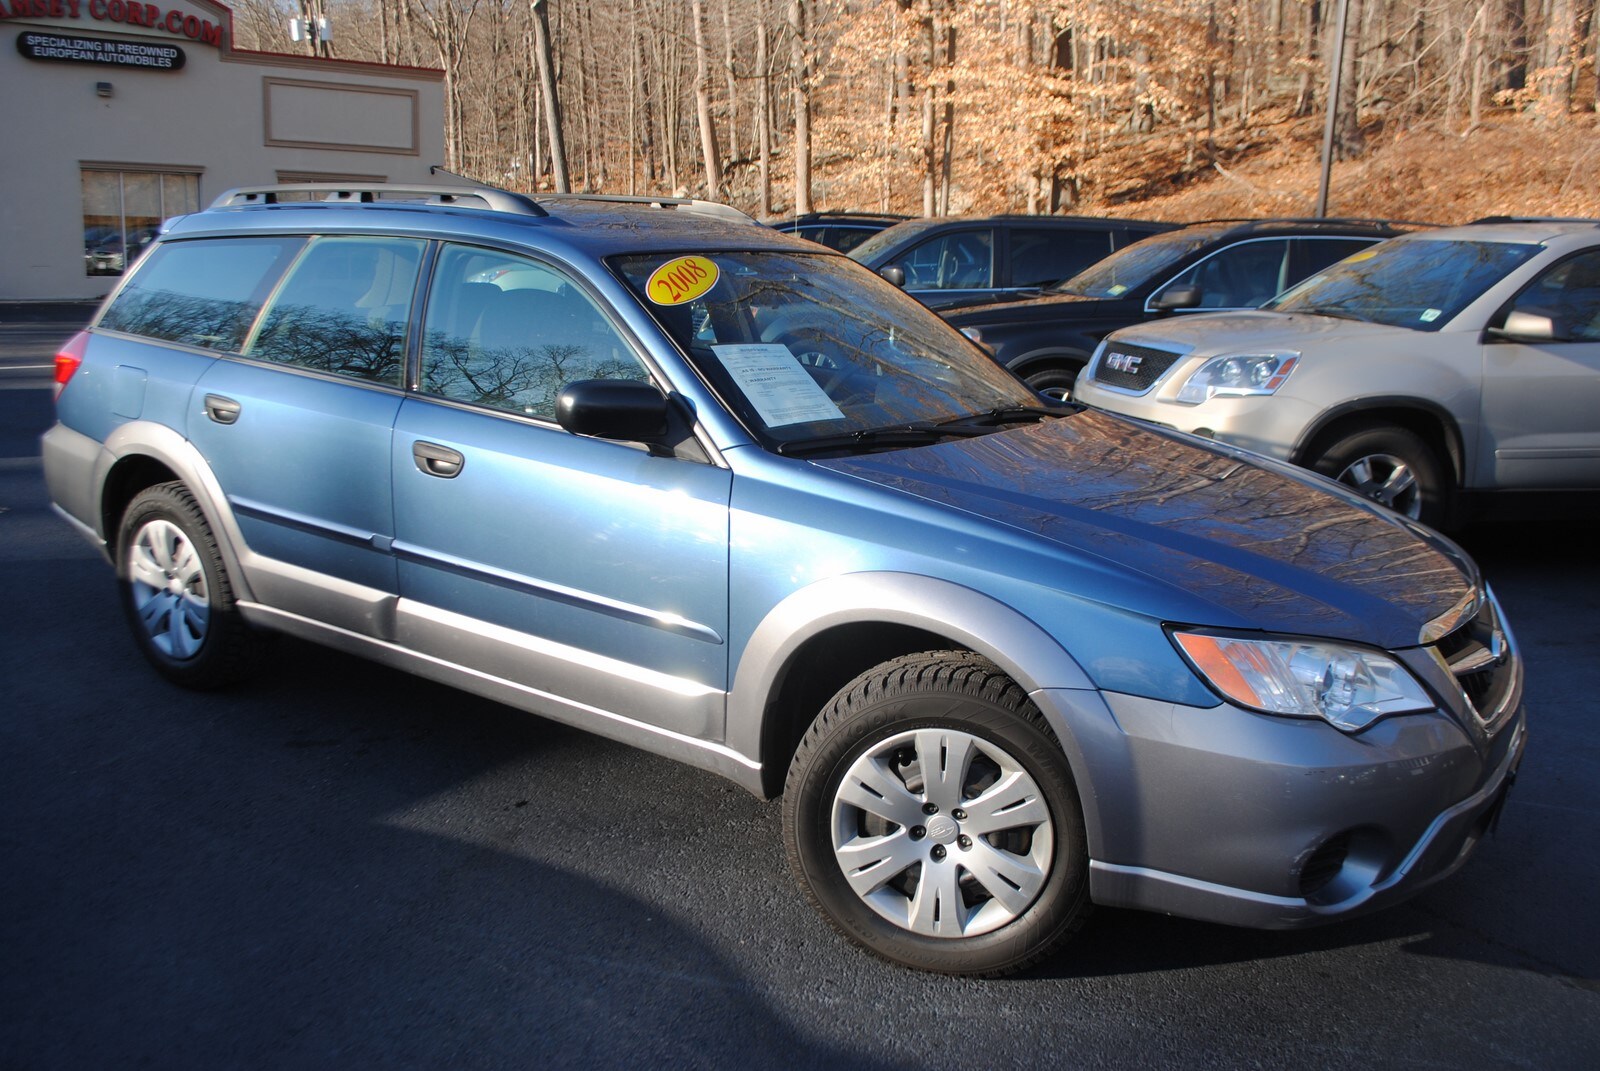 Used 2008 Subaru Outback For Sale West Milford NJ